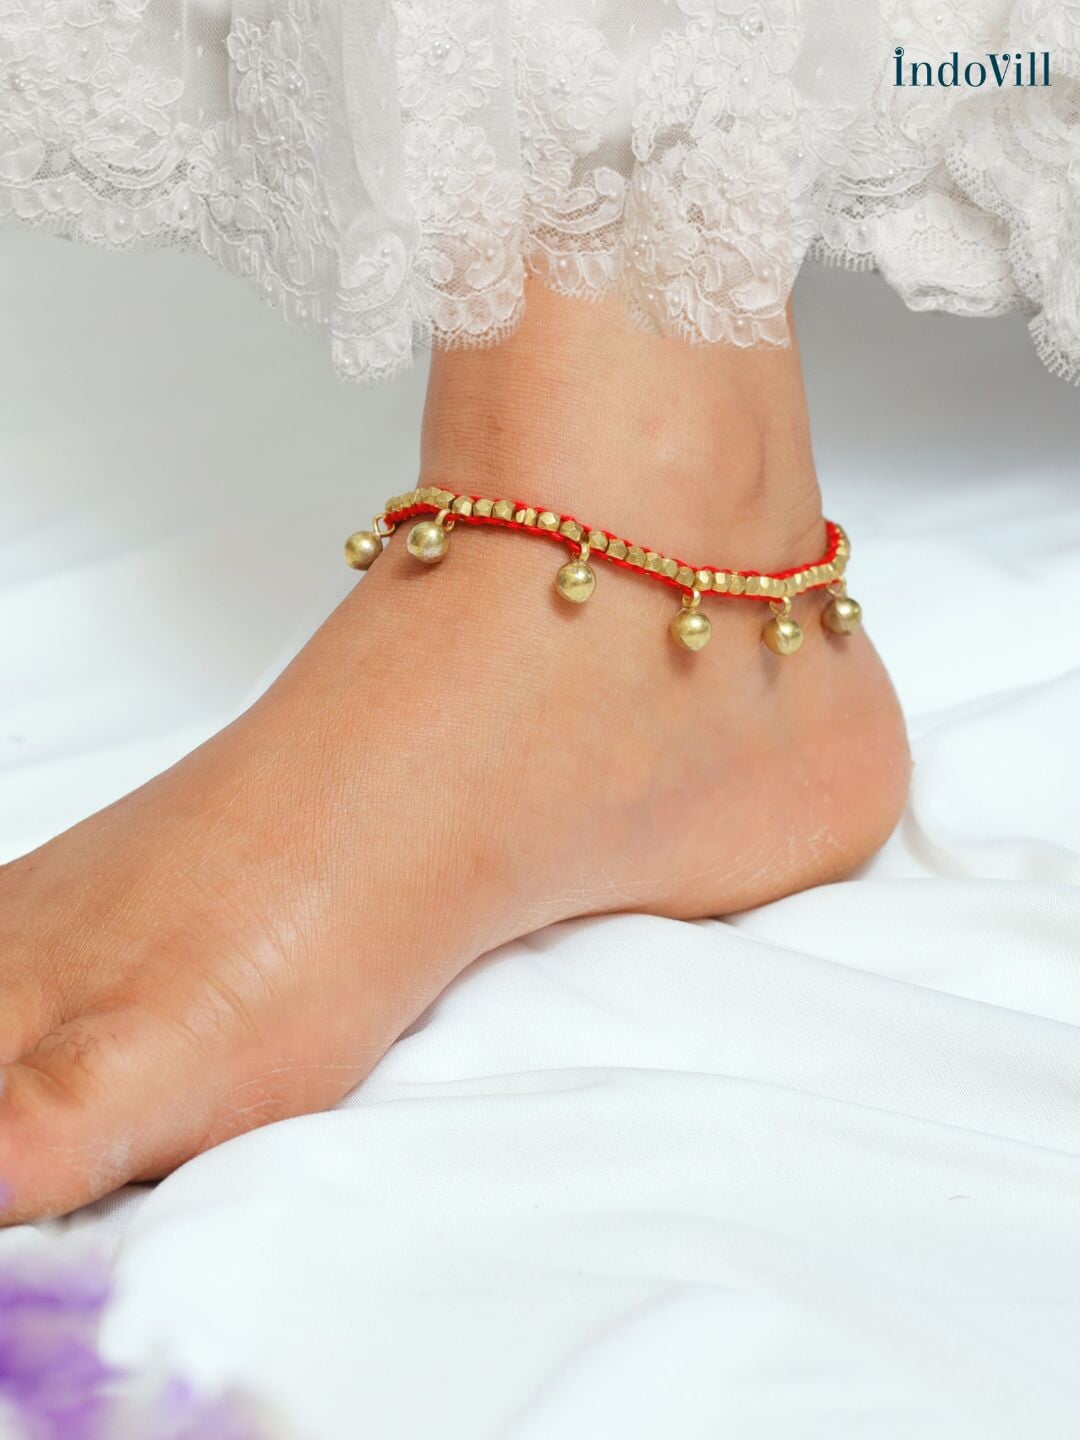 Brass Bead Dhokra Anklet combination of Small Beads & Balls